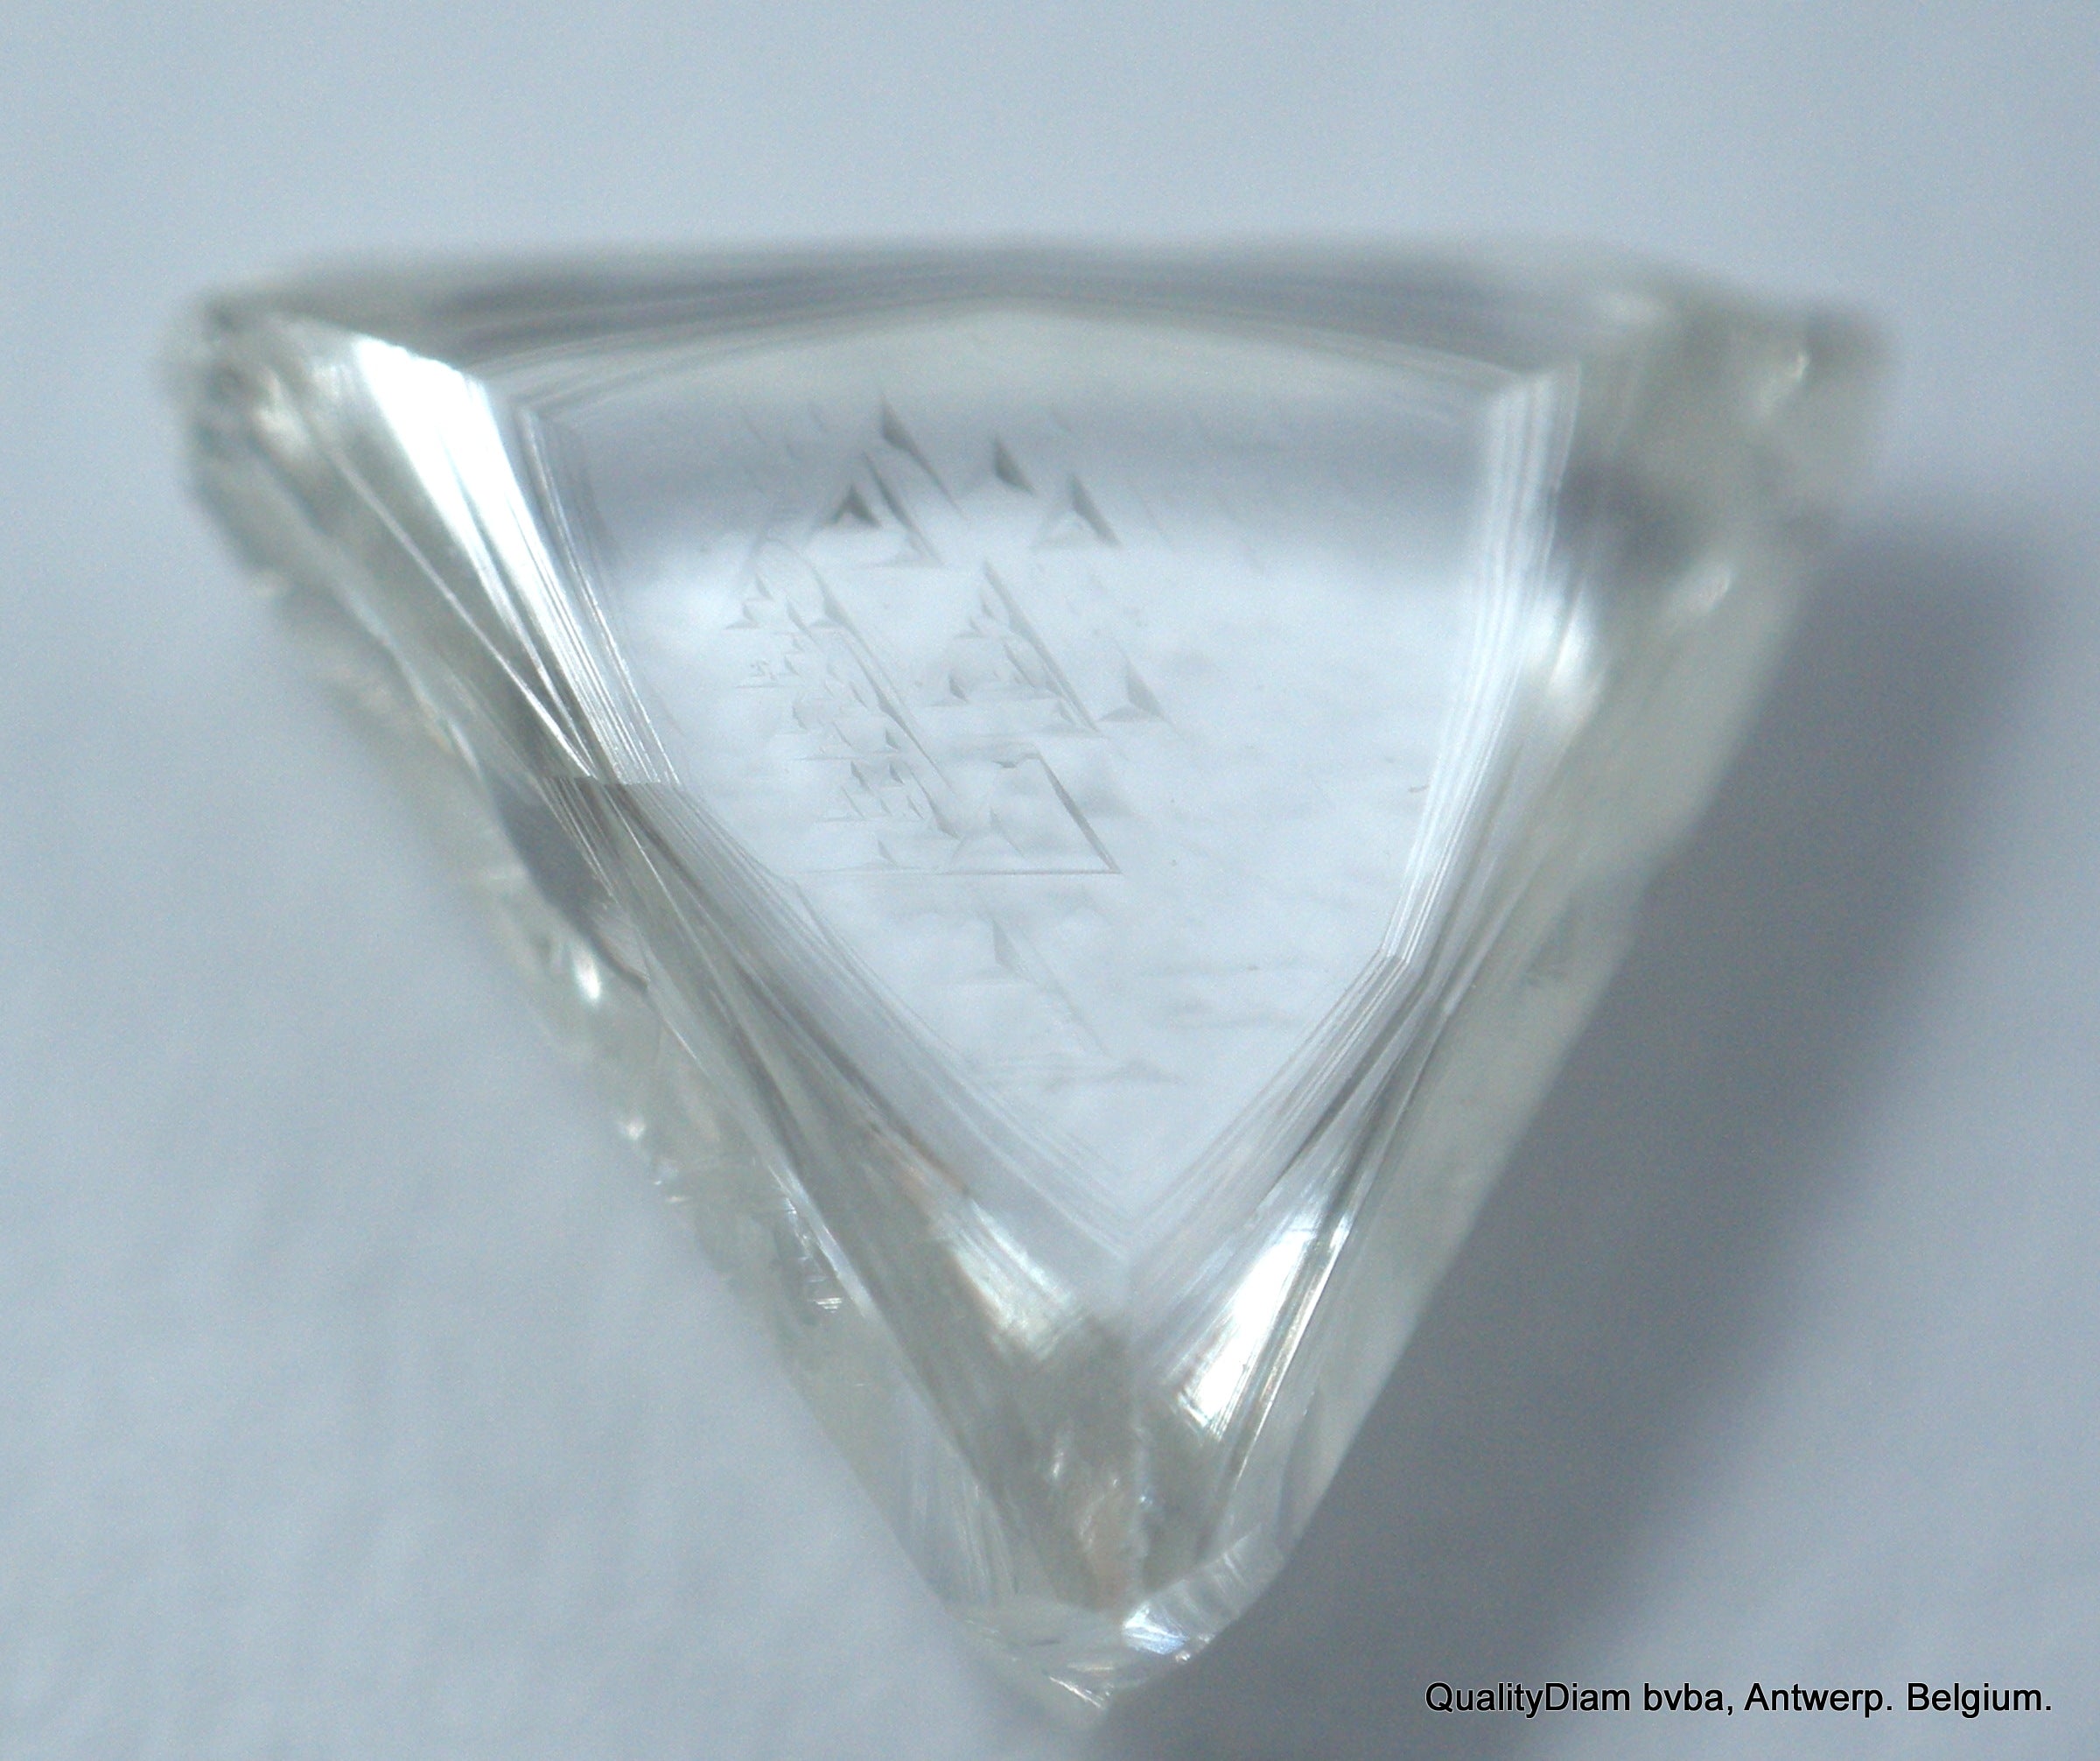 G Vs1 Triangle Shape Natural raw Diamond Recenlty Mined Out Uncut Gem